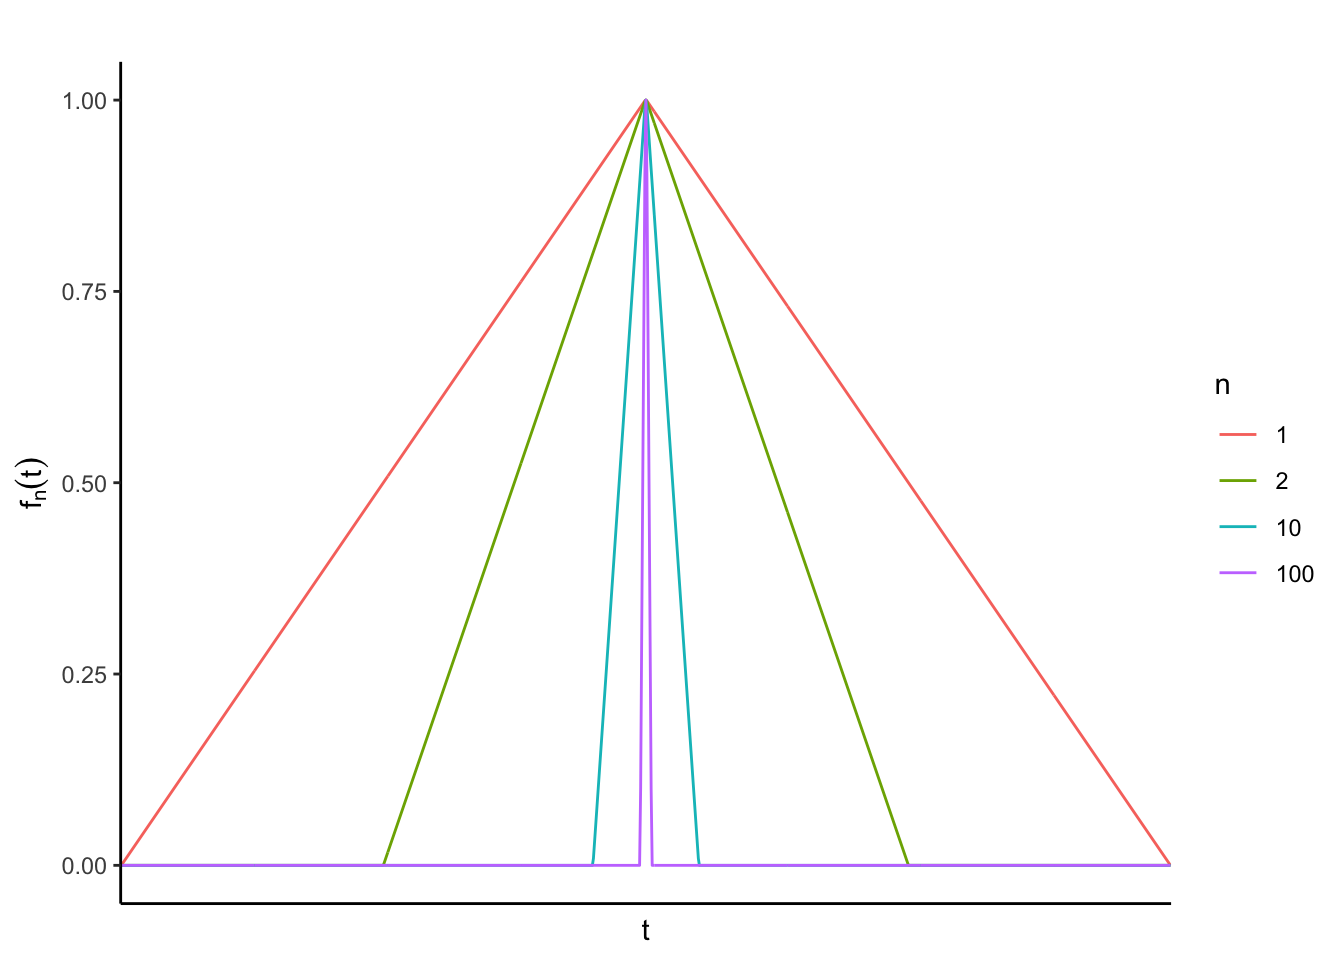 A plot showing some of the functions for different values of n.